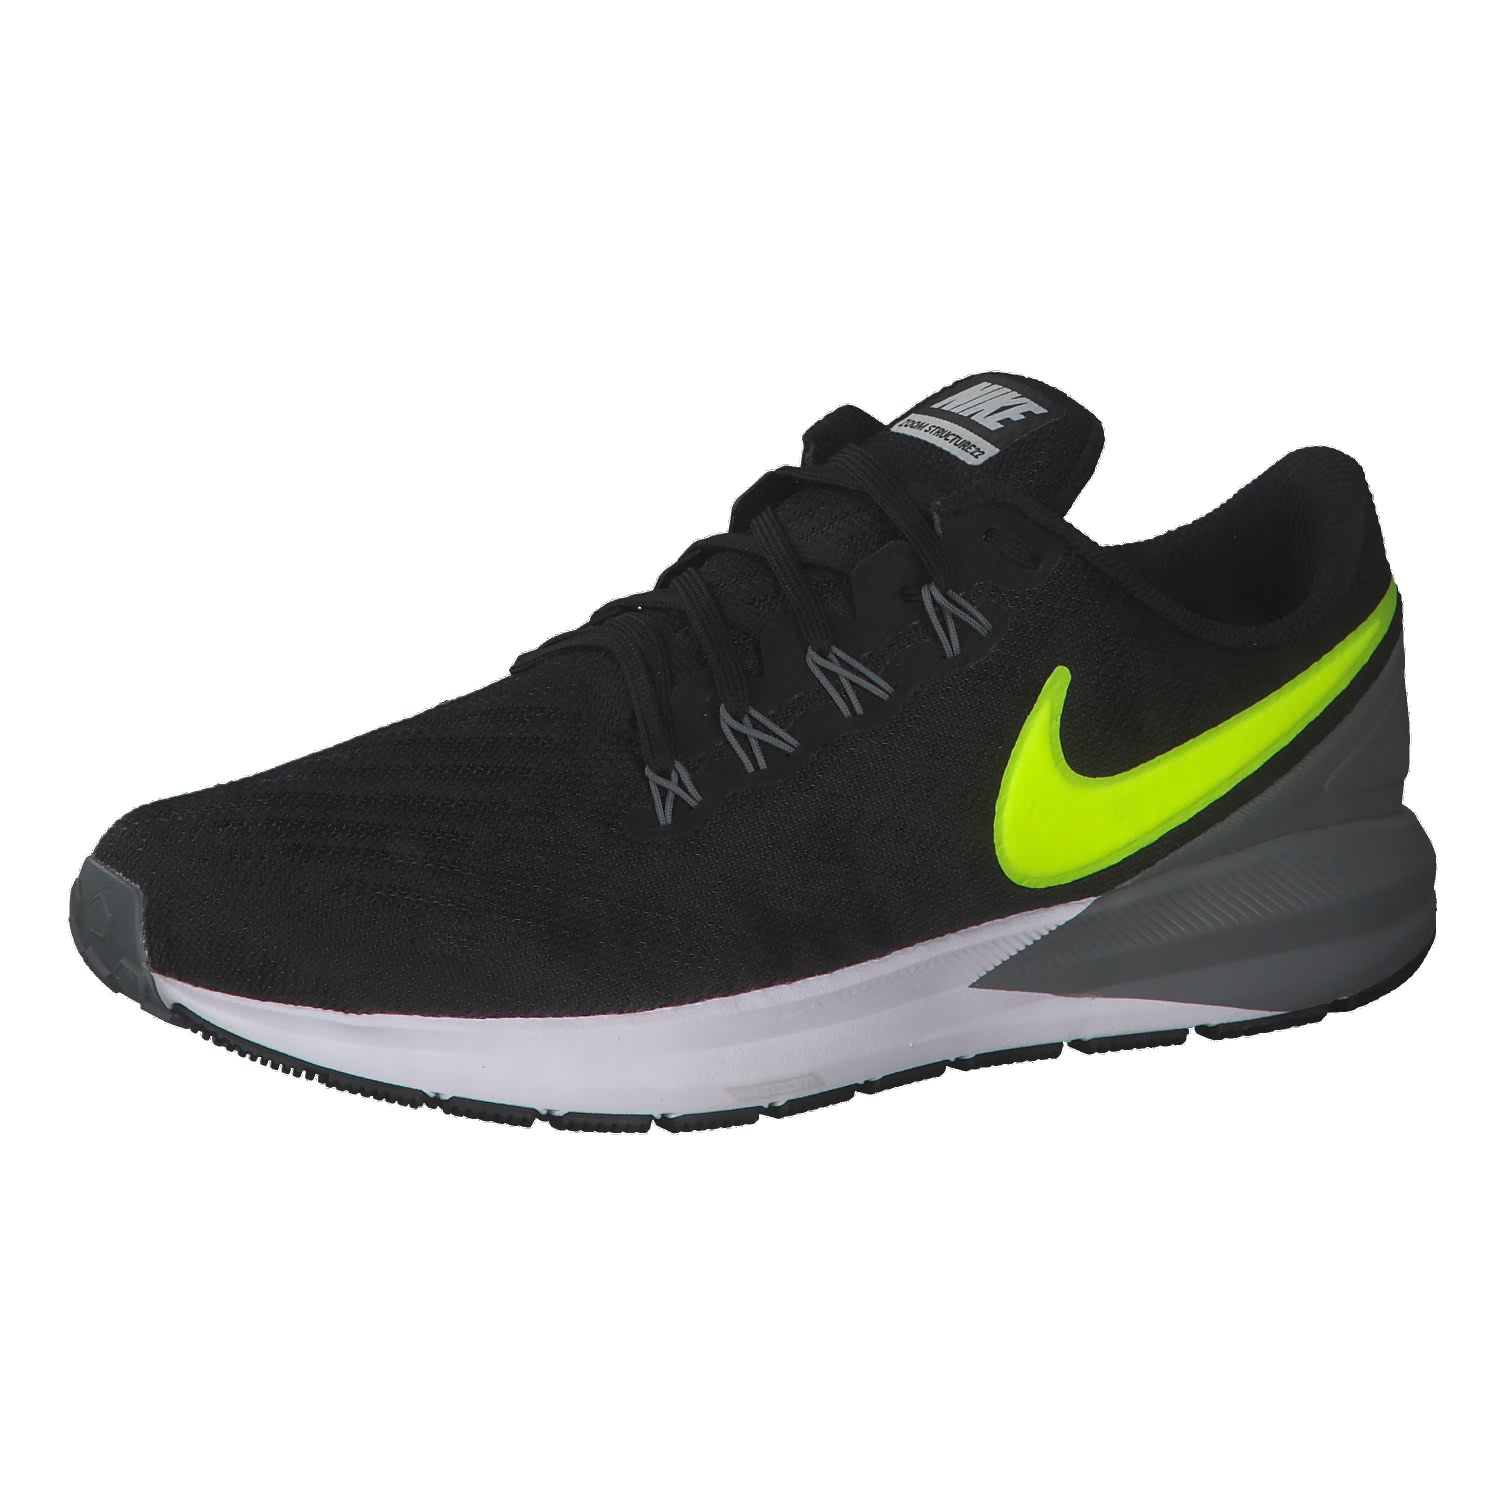 nike zoom structure 22 grey